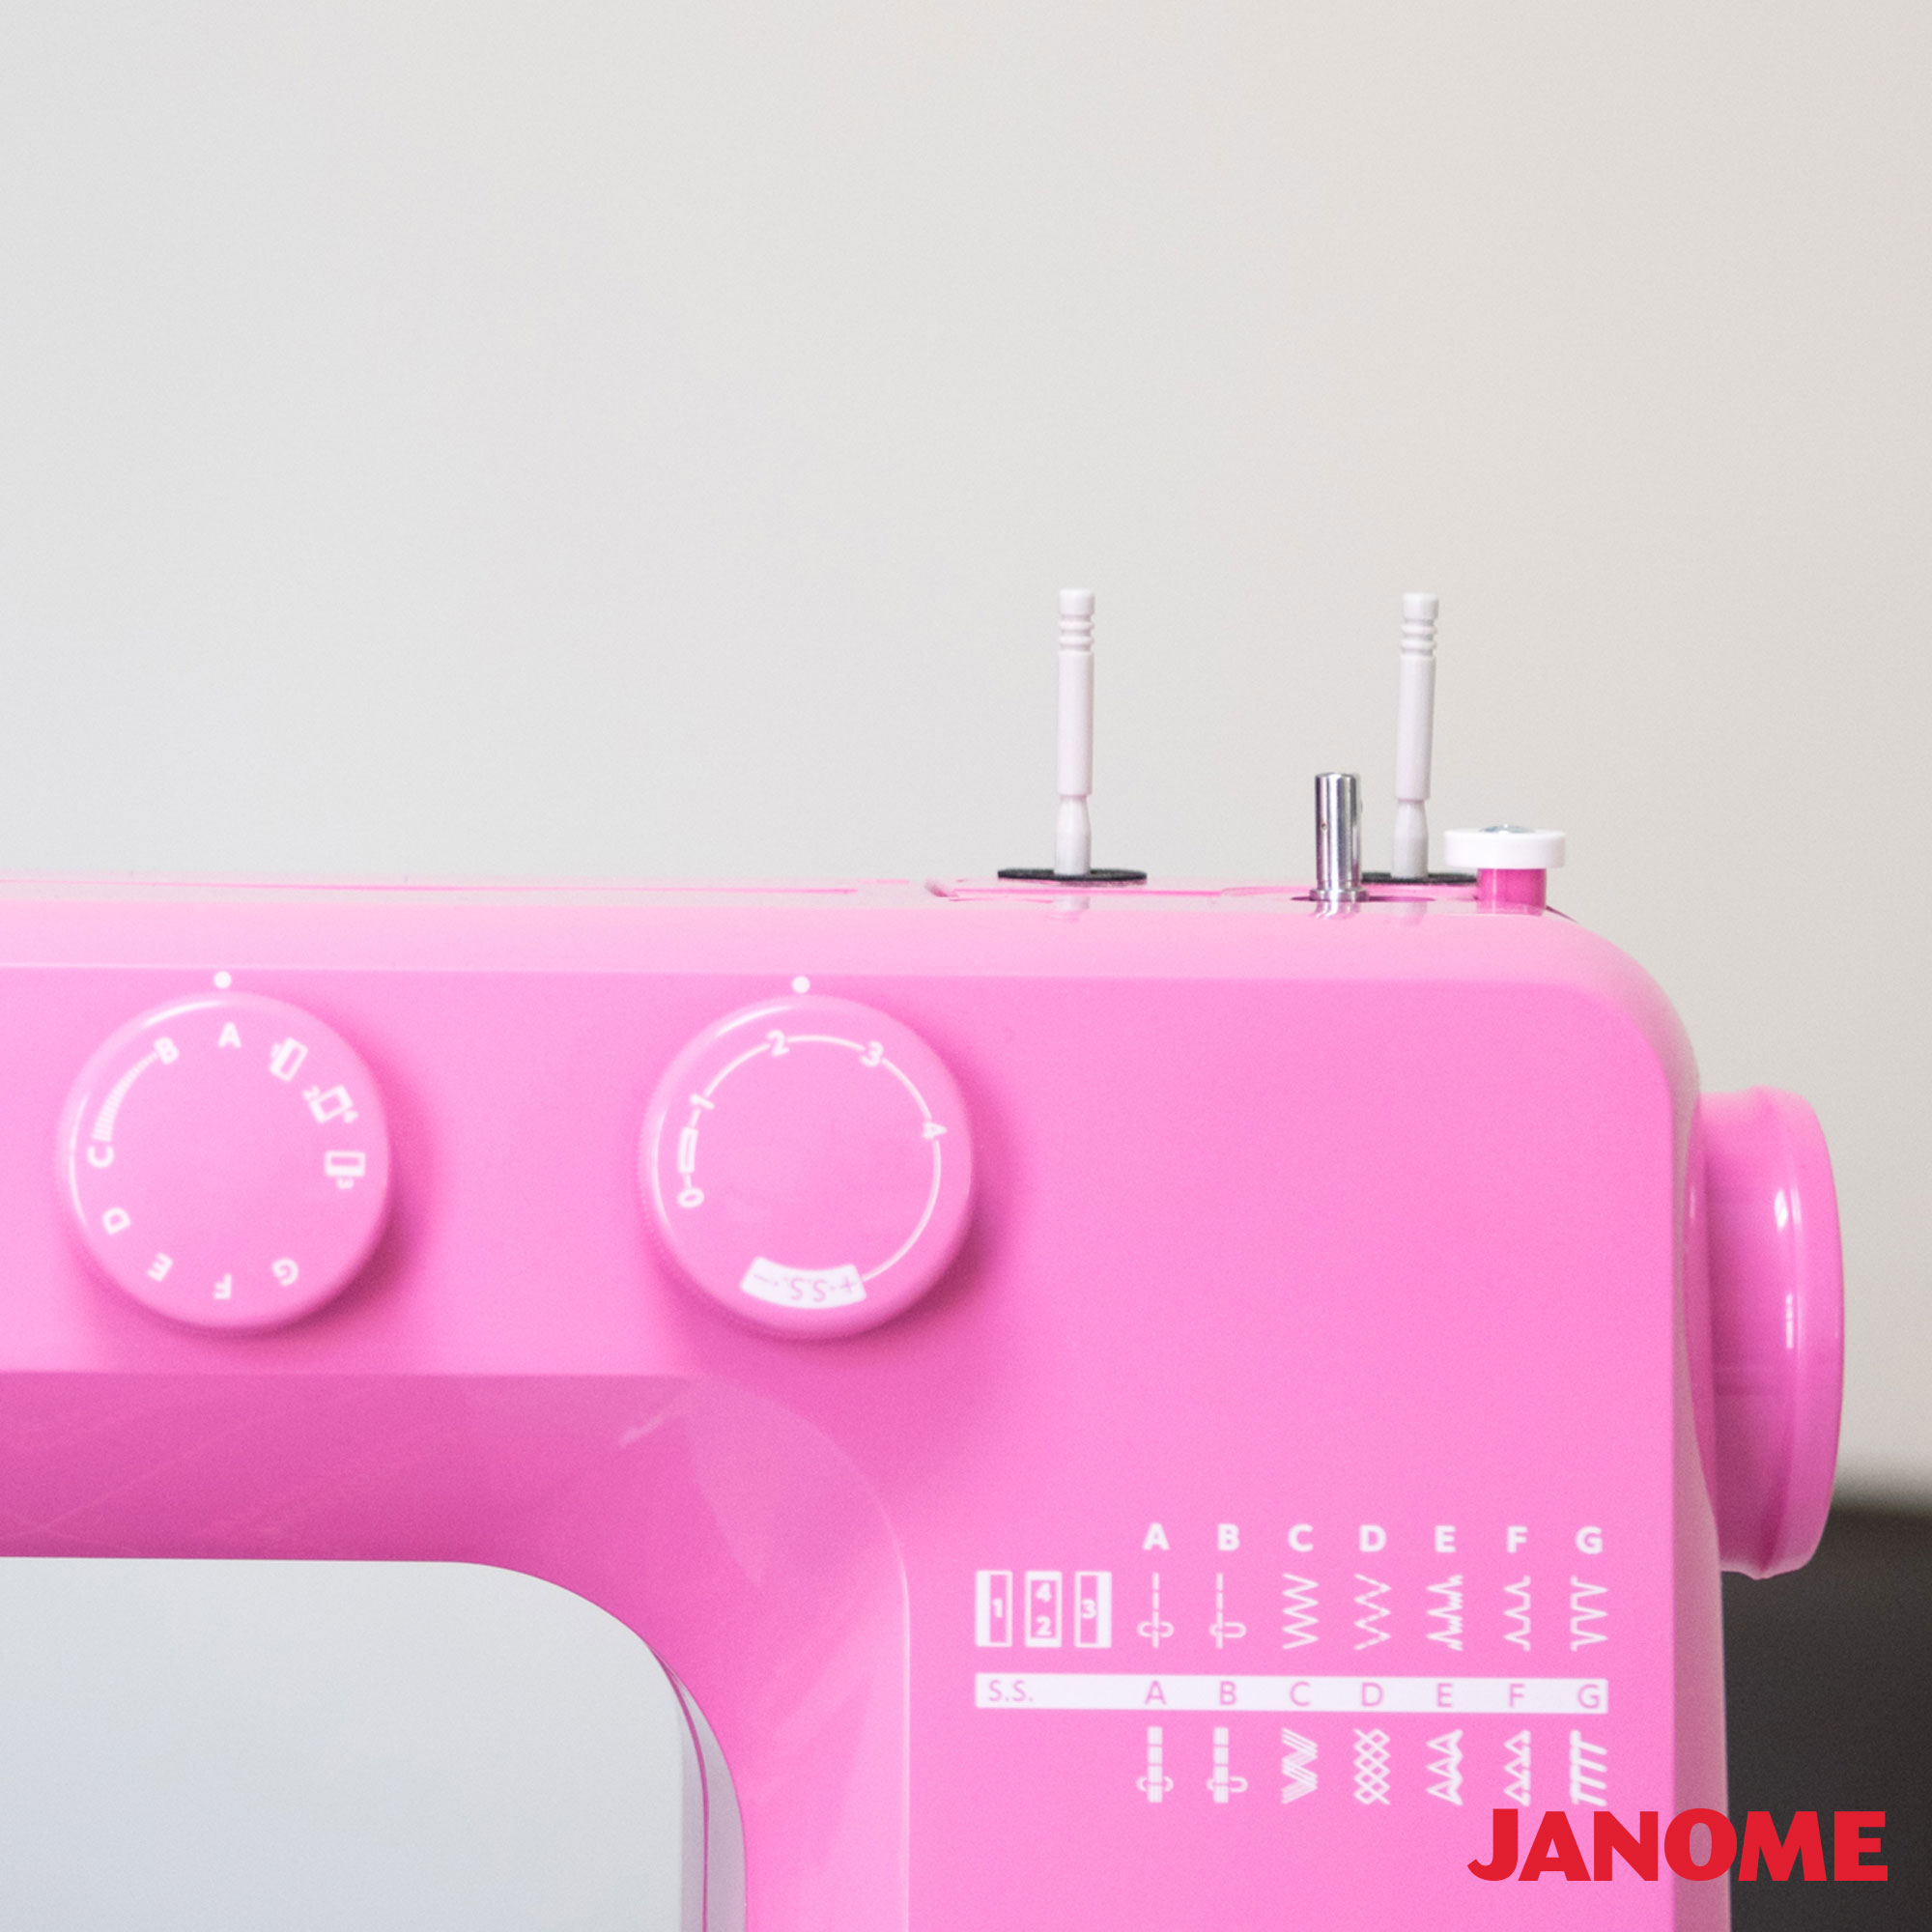 Unboxing Janome Sorbet Domestic Sewing Machine, Quick Sewing Tips #9